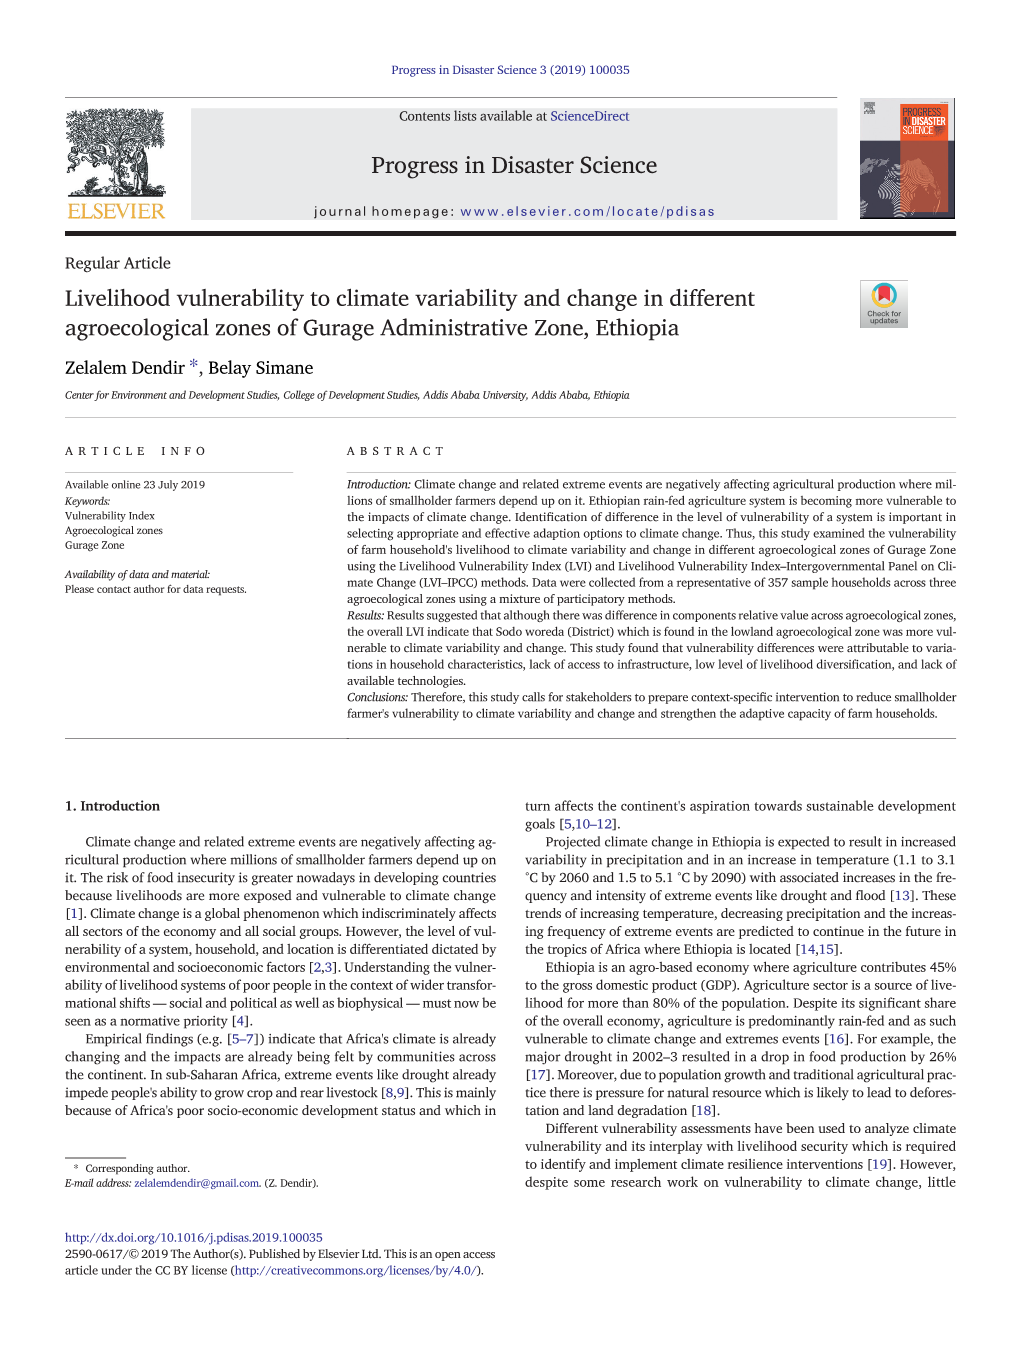 Livelihood Vulnerability to Climate Variability and Change in Different Agroecological Zones of Gurage Administrative Zone, Ethiopia ⁎ Zelalem Dendir , Belay Simane